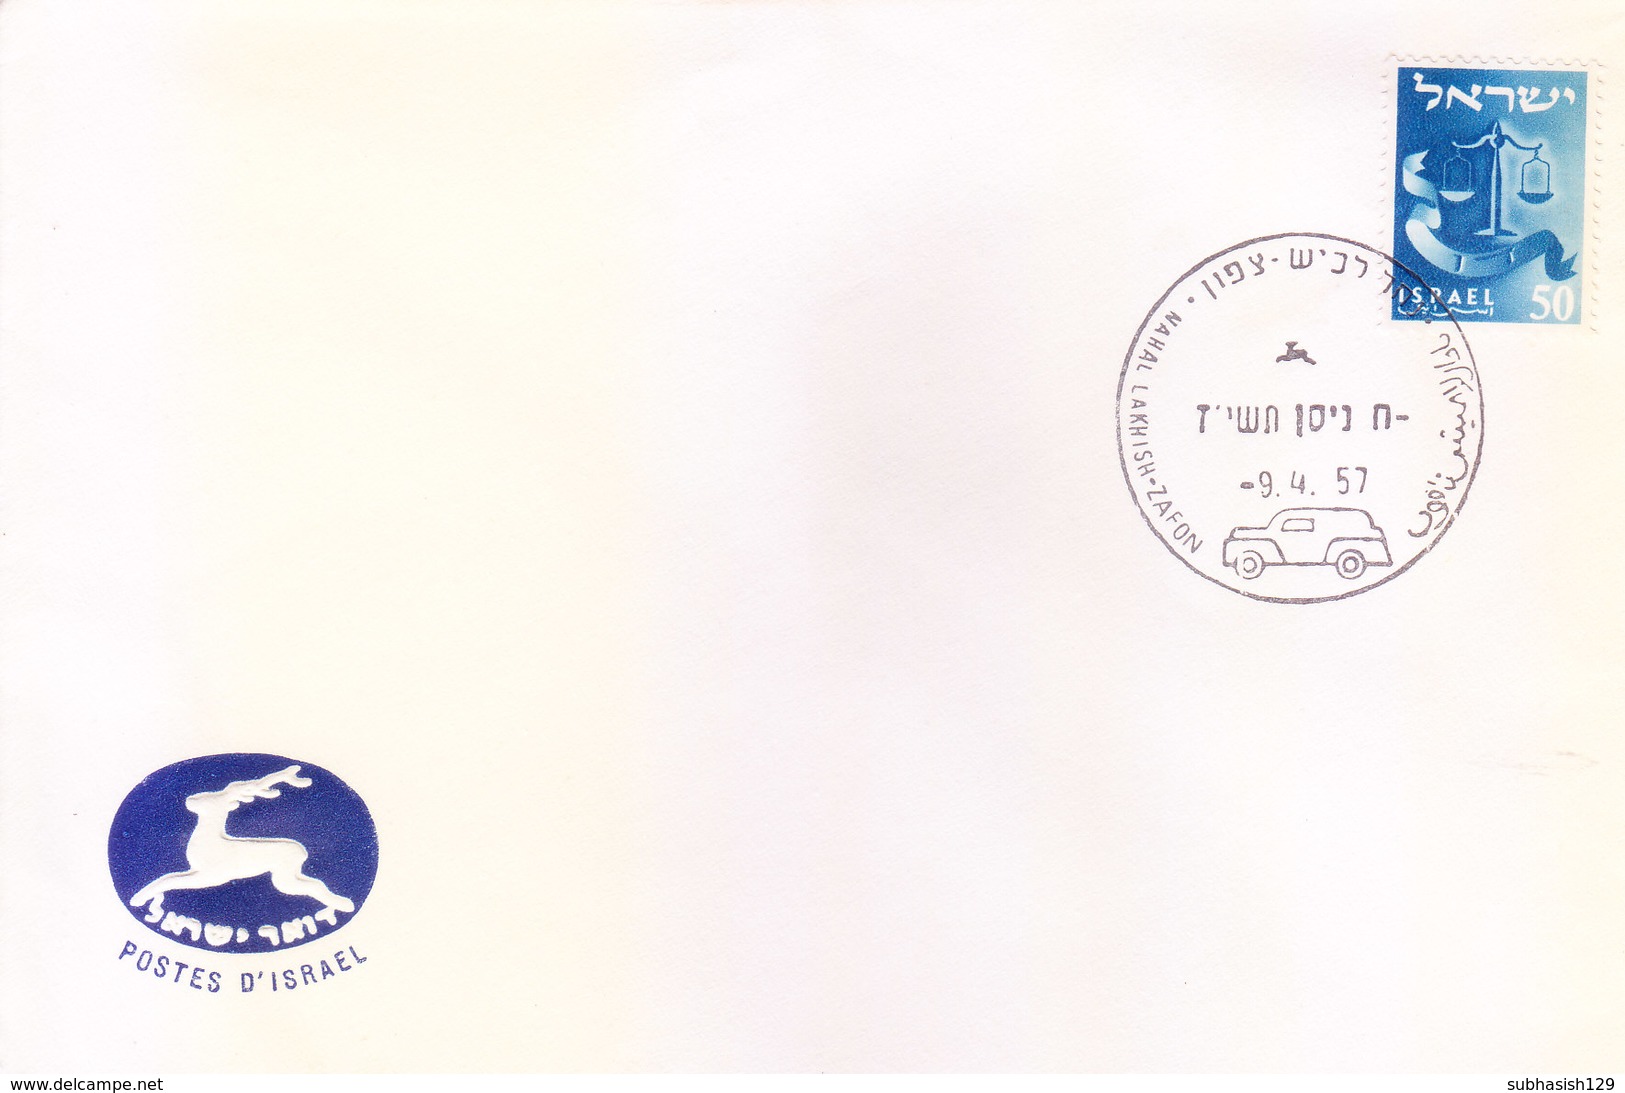 ISRAEL : FIRST DAY COVER : 09-04-1957 : INAUGURATION OF CAR POST OFFICE NAHAL LAKHISH-ZAFON : PICTORIAL CANCELLATION - Lettres & Documents